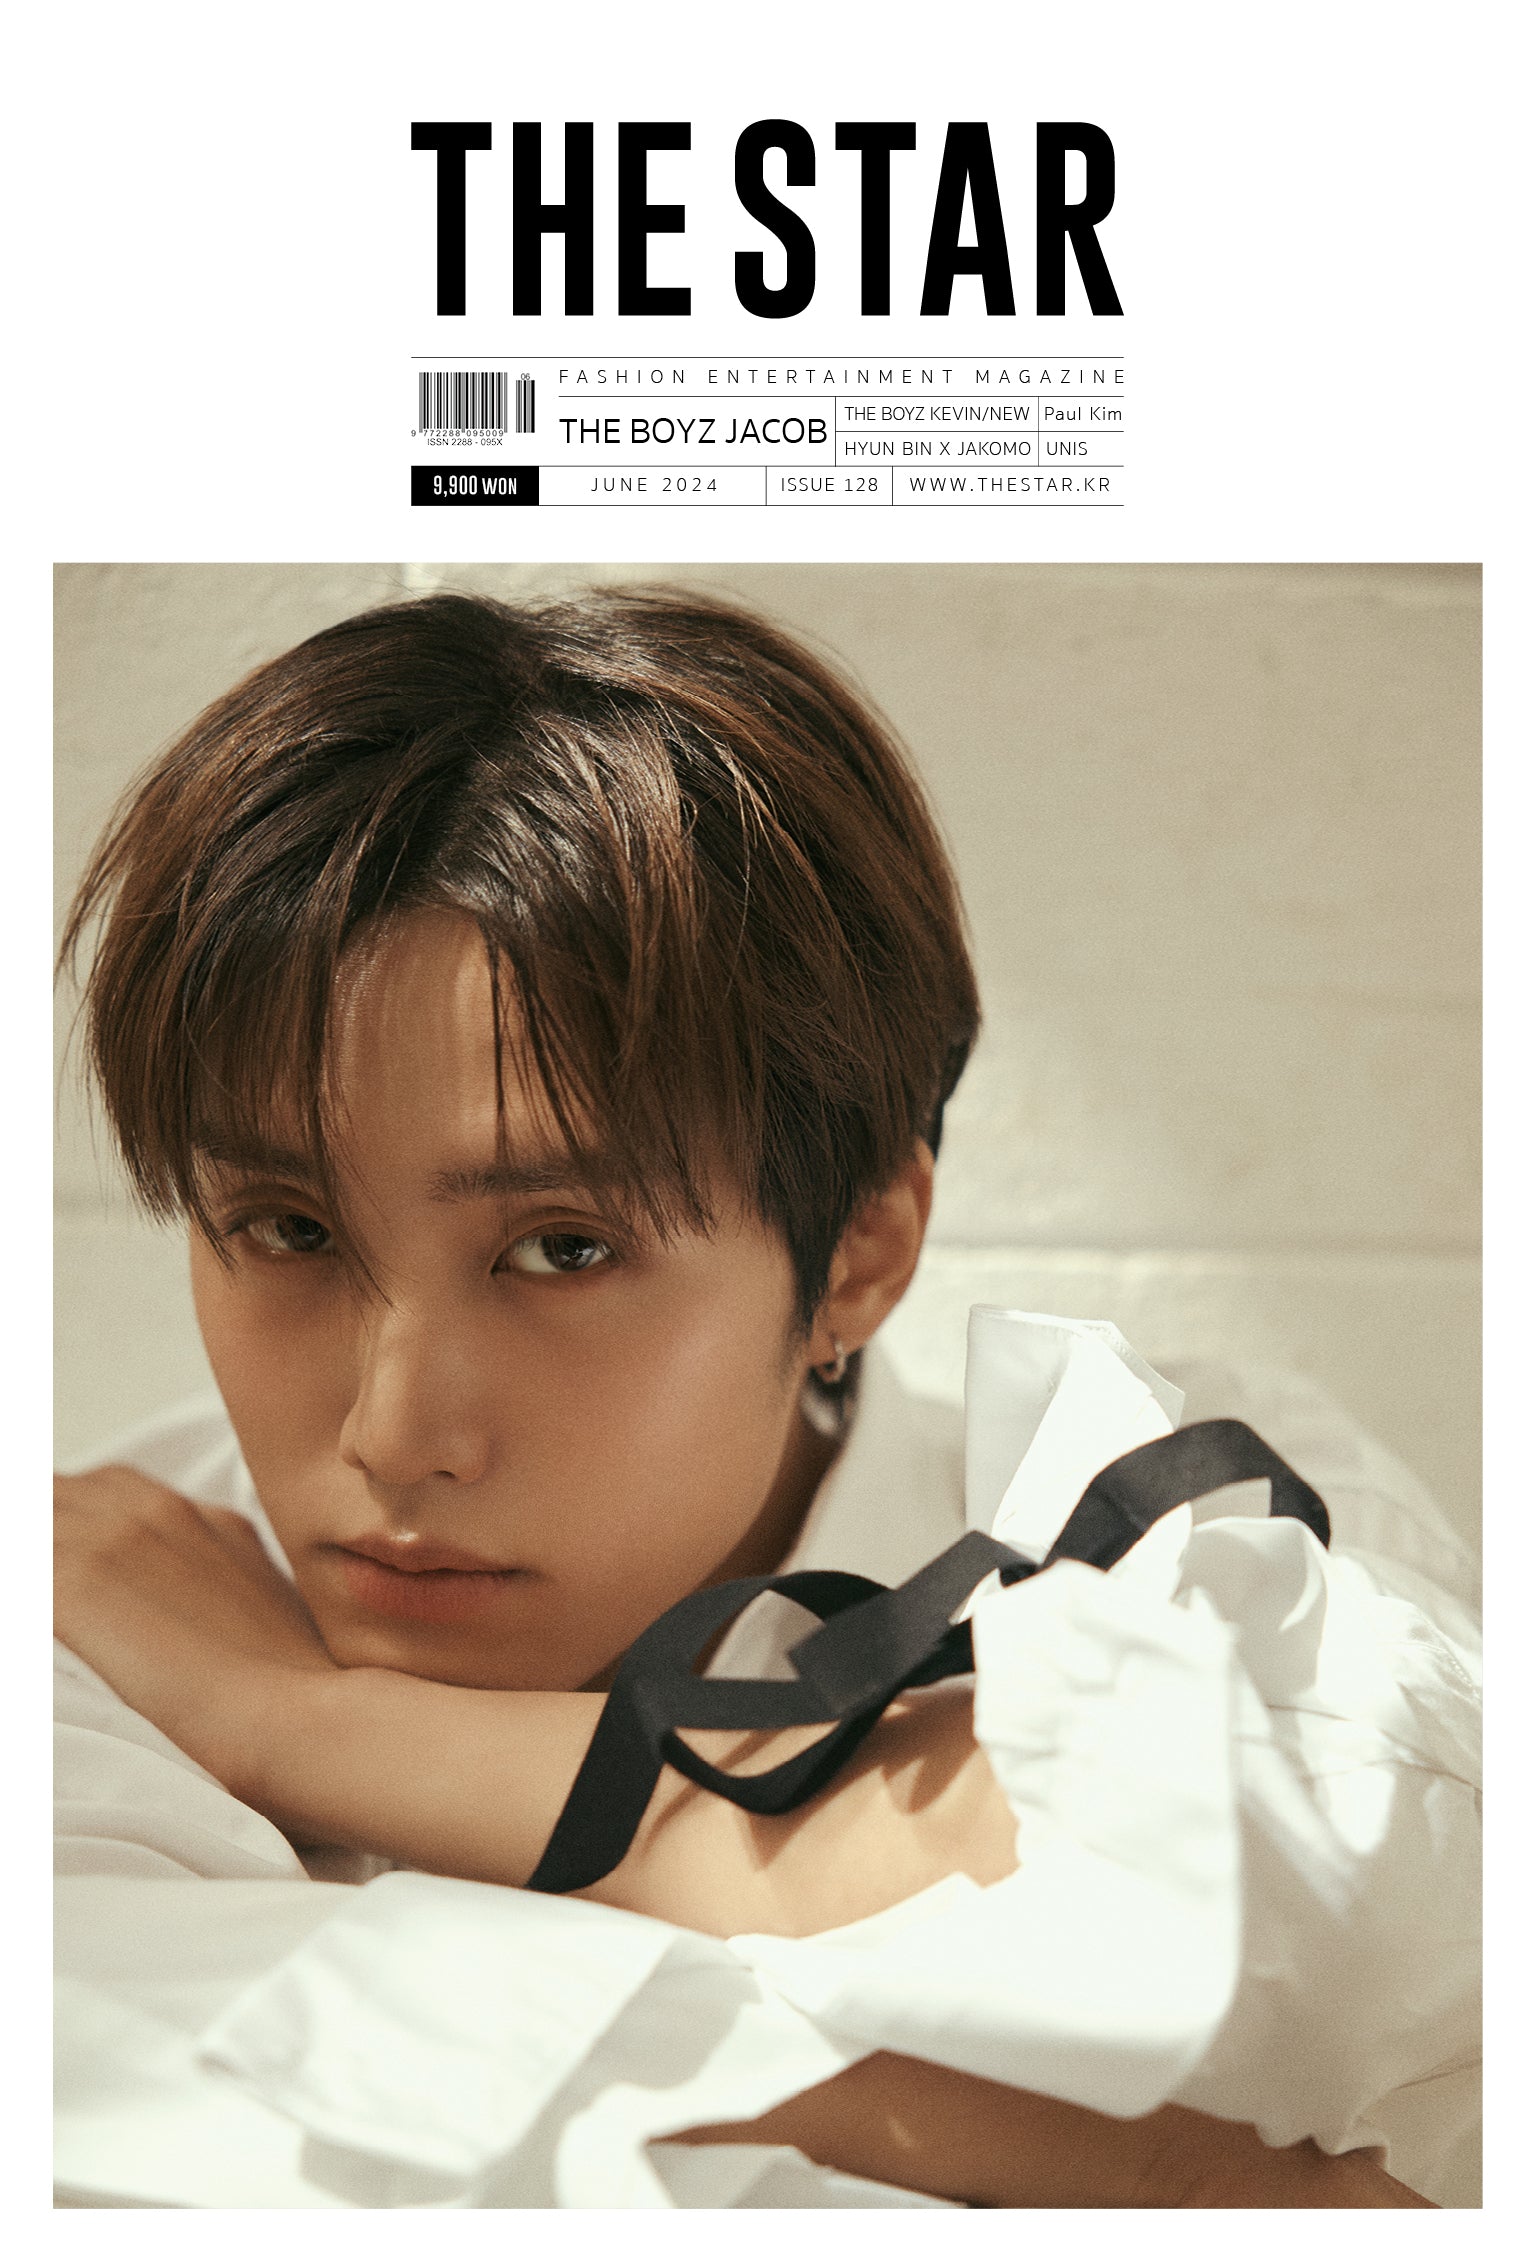 THE STAR - [2024, JUNE] - Cover : THE BOYZ JACOB COVER C